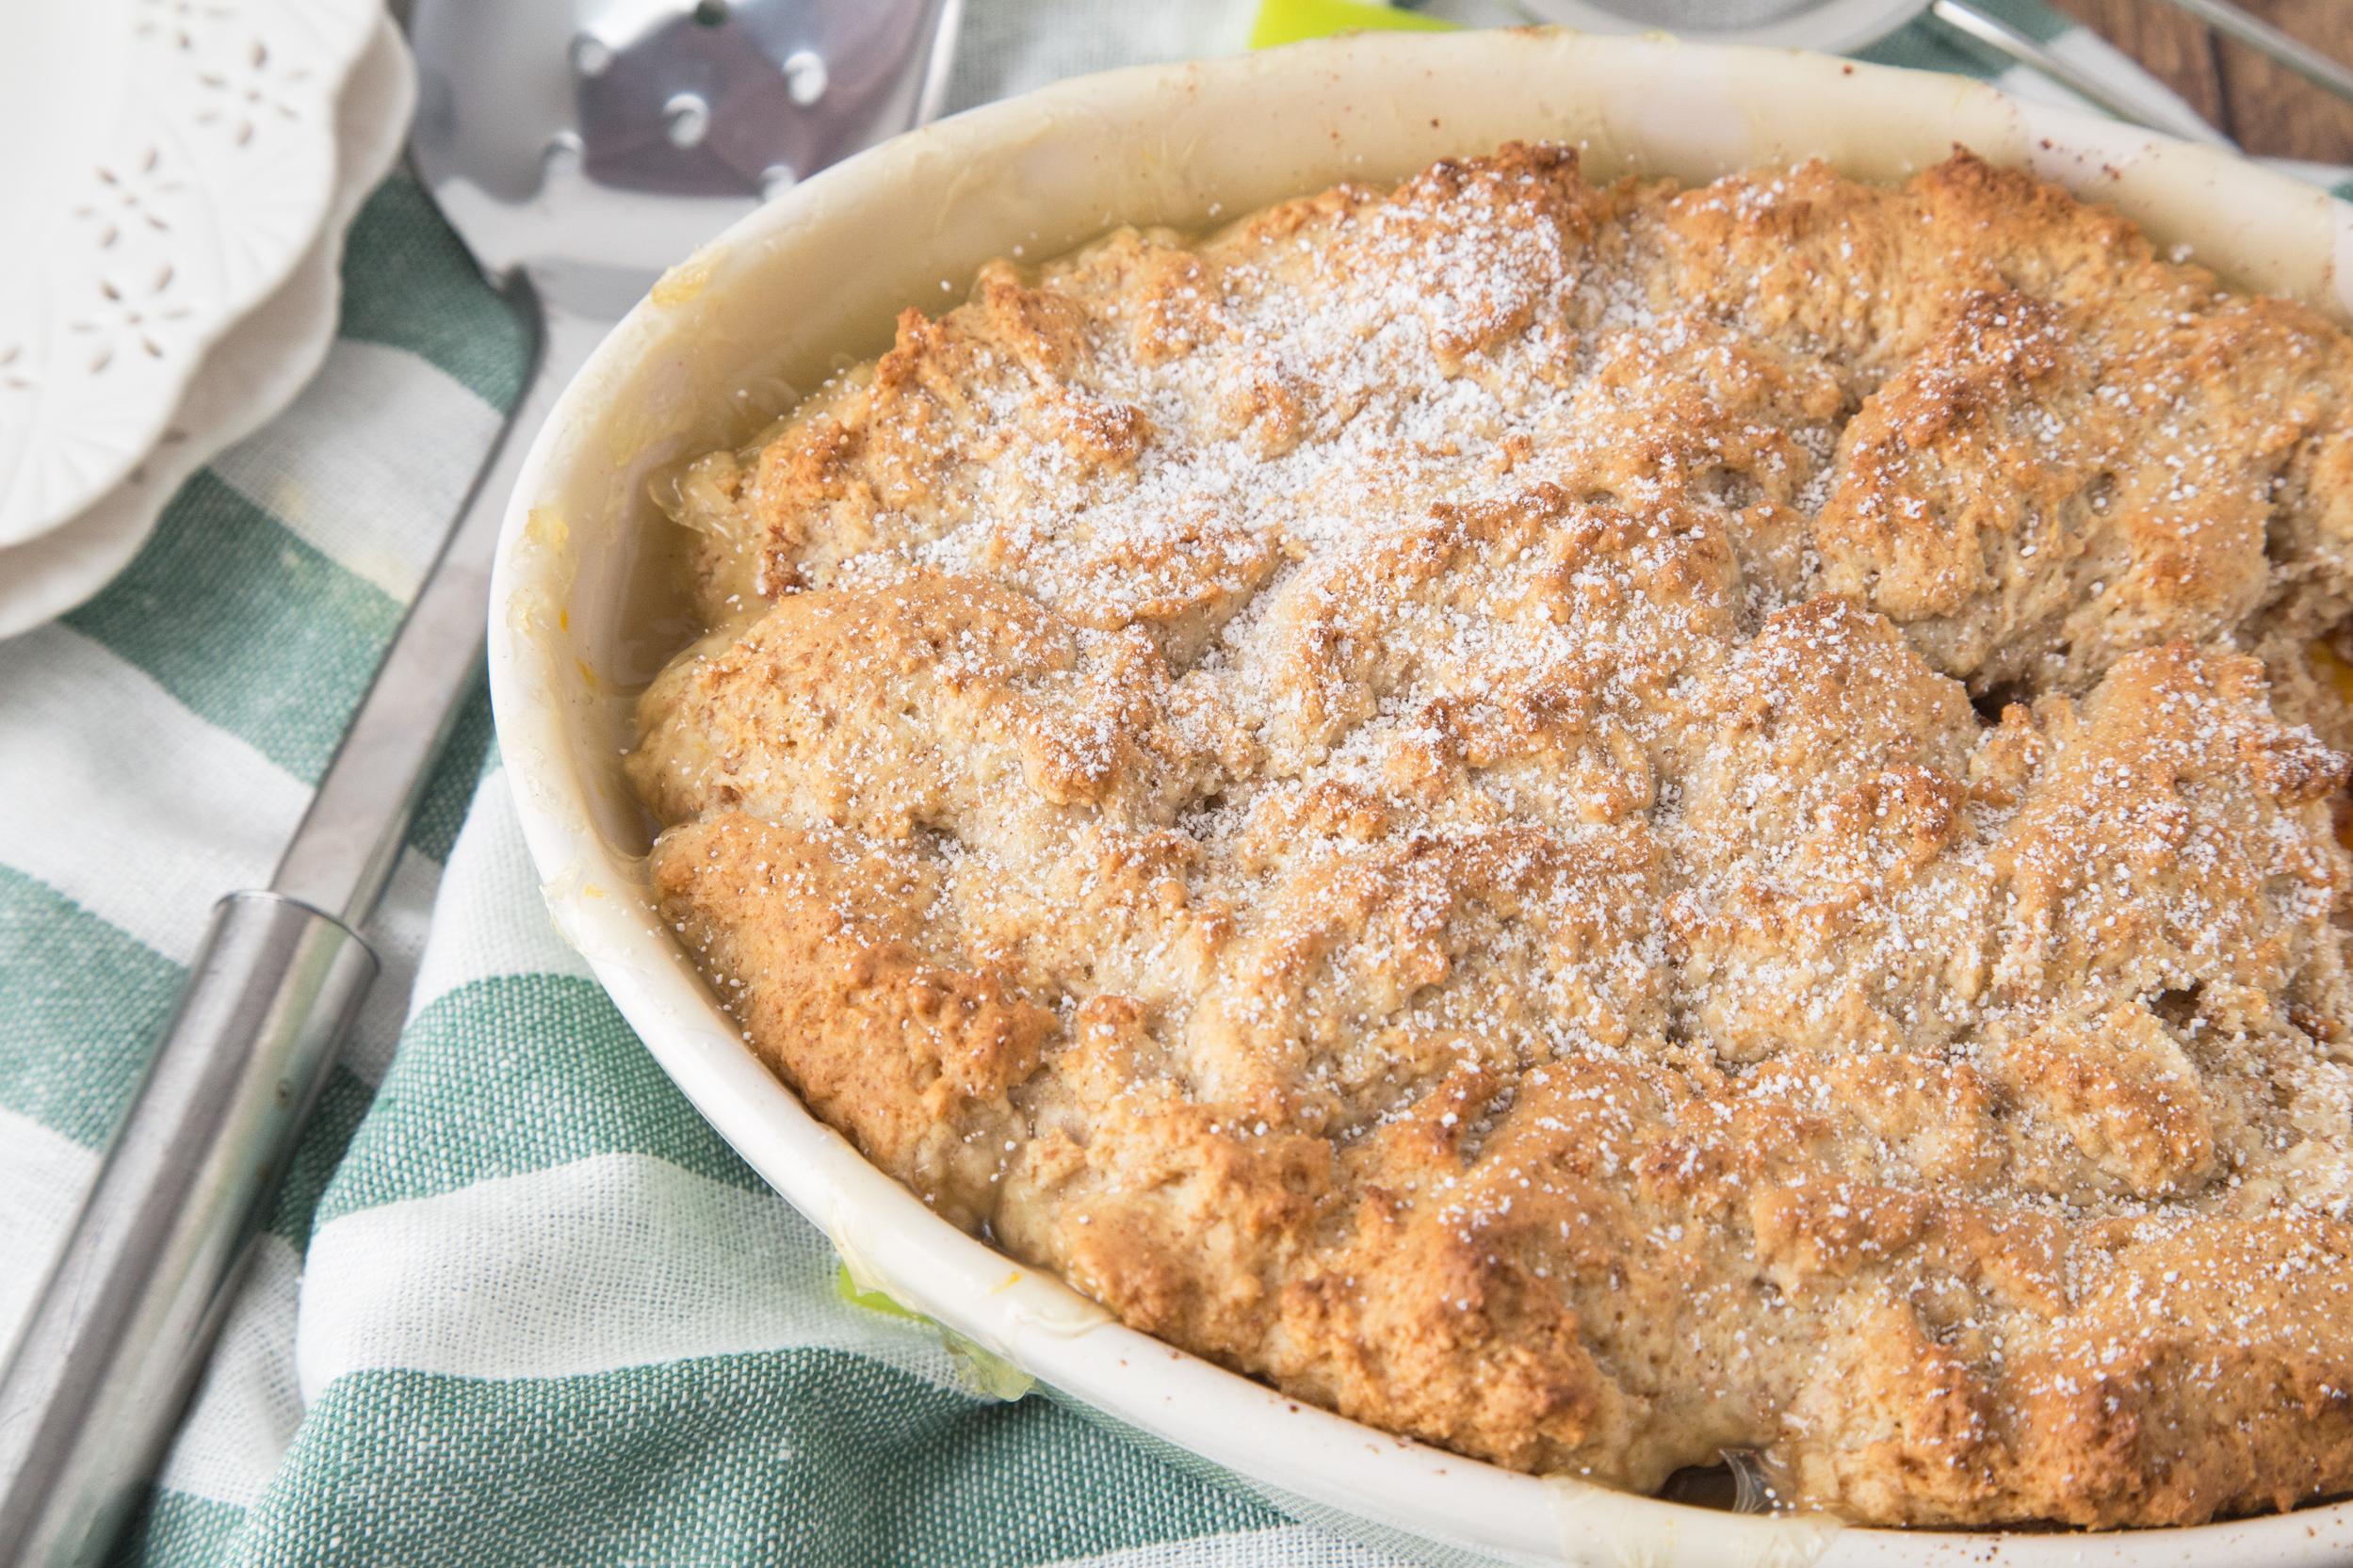  Peach season wouldn't be complete without this vegan cobbler.